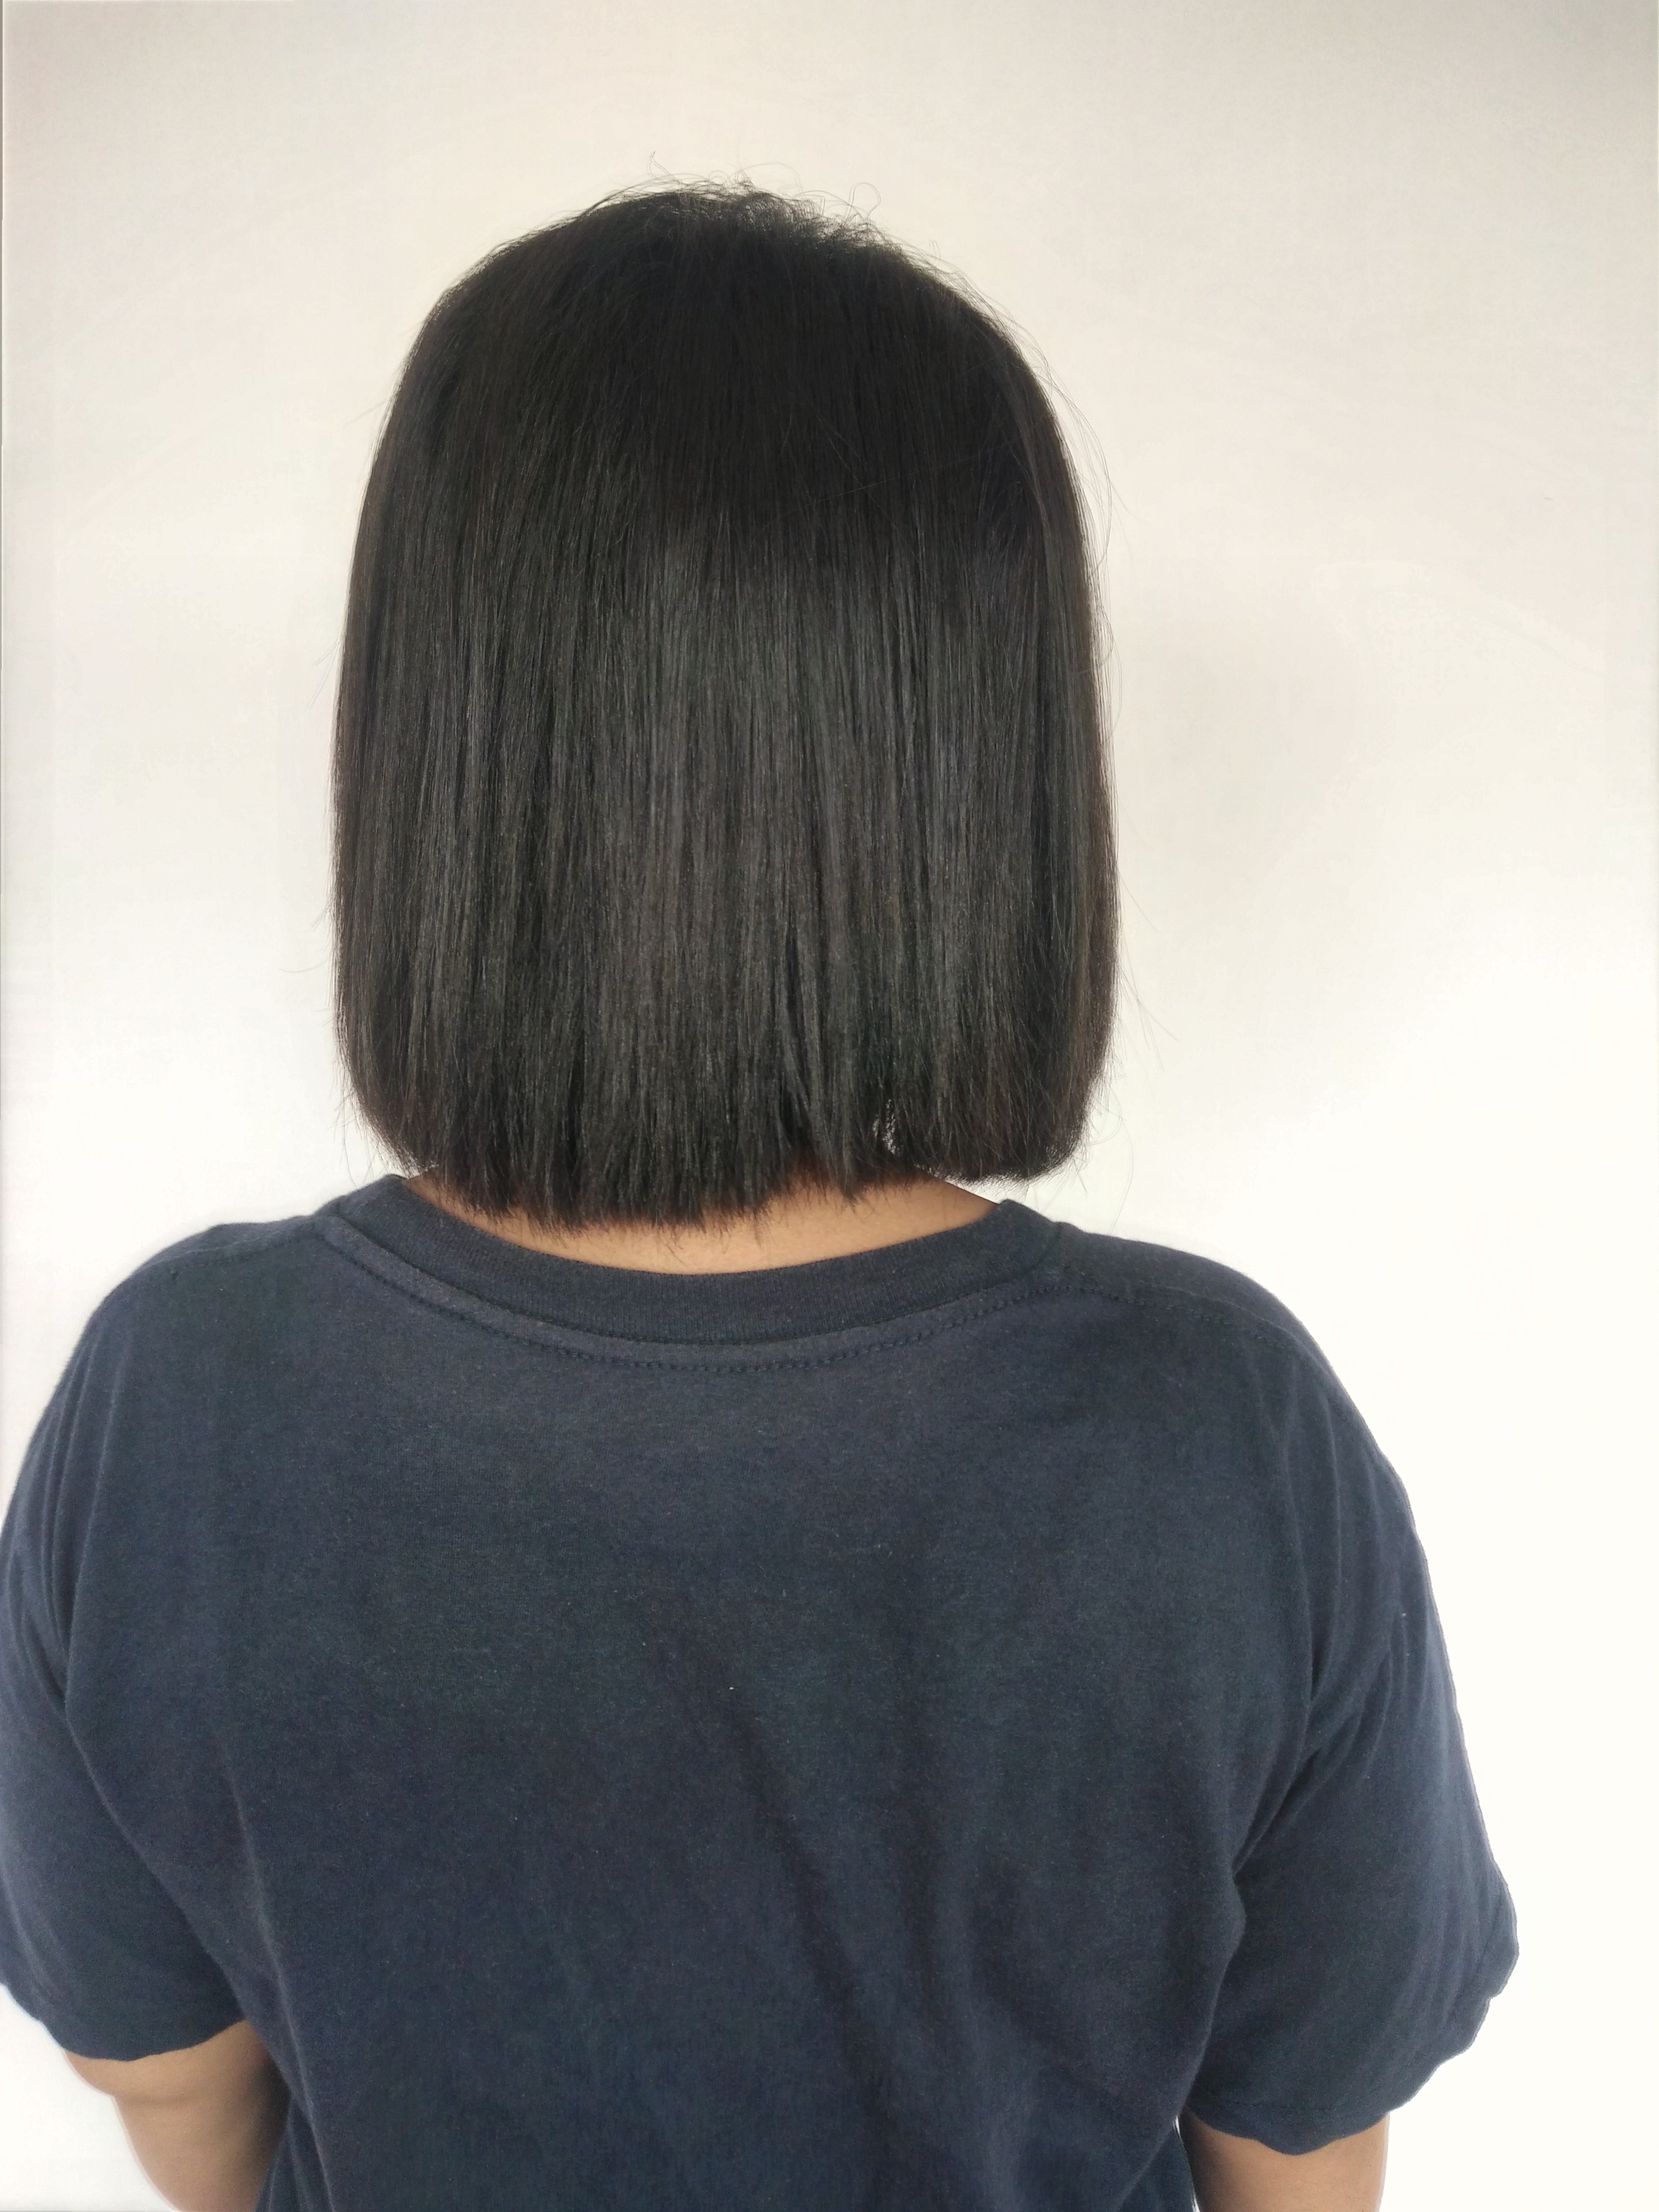 Download File:Back view of woman with short black hair (1).jpg ...